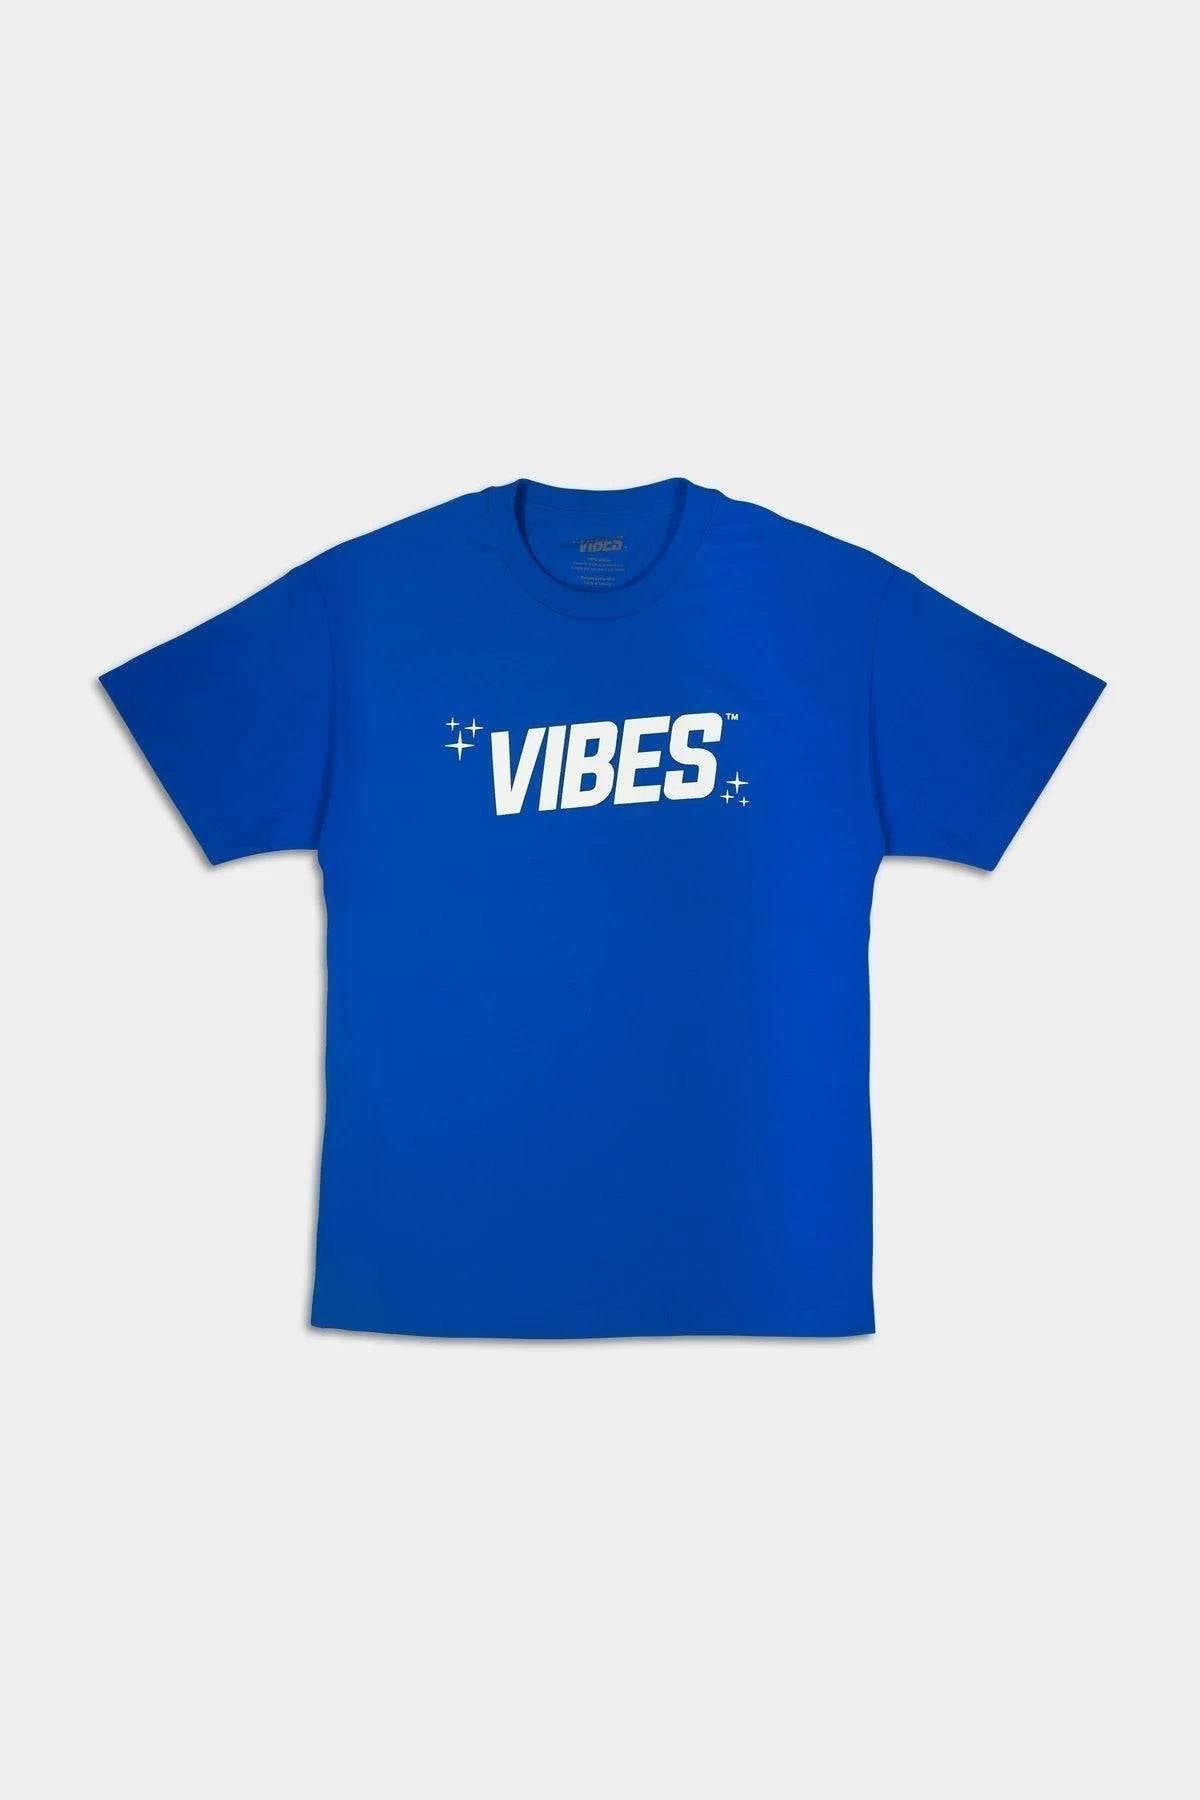 VIBES Blue With White Logo T-Shirt Small